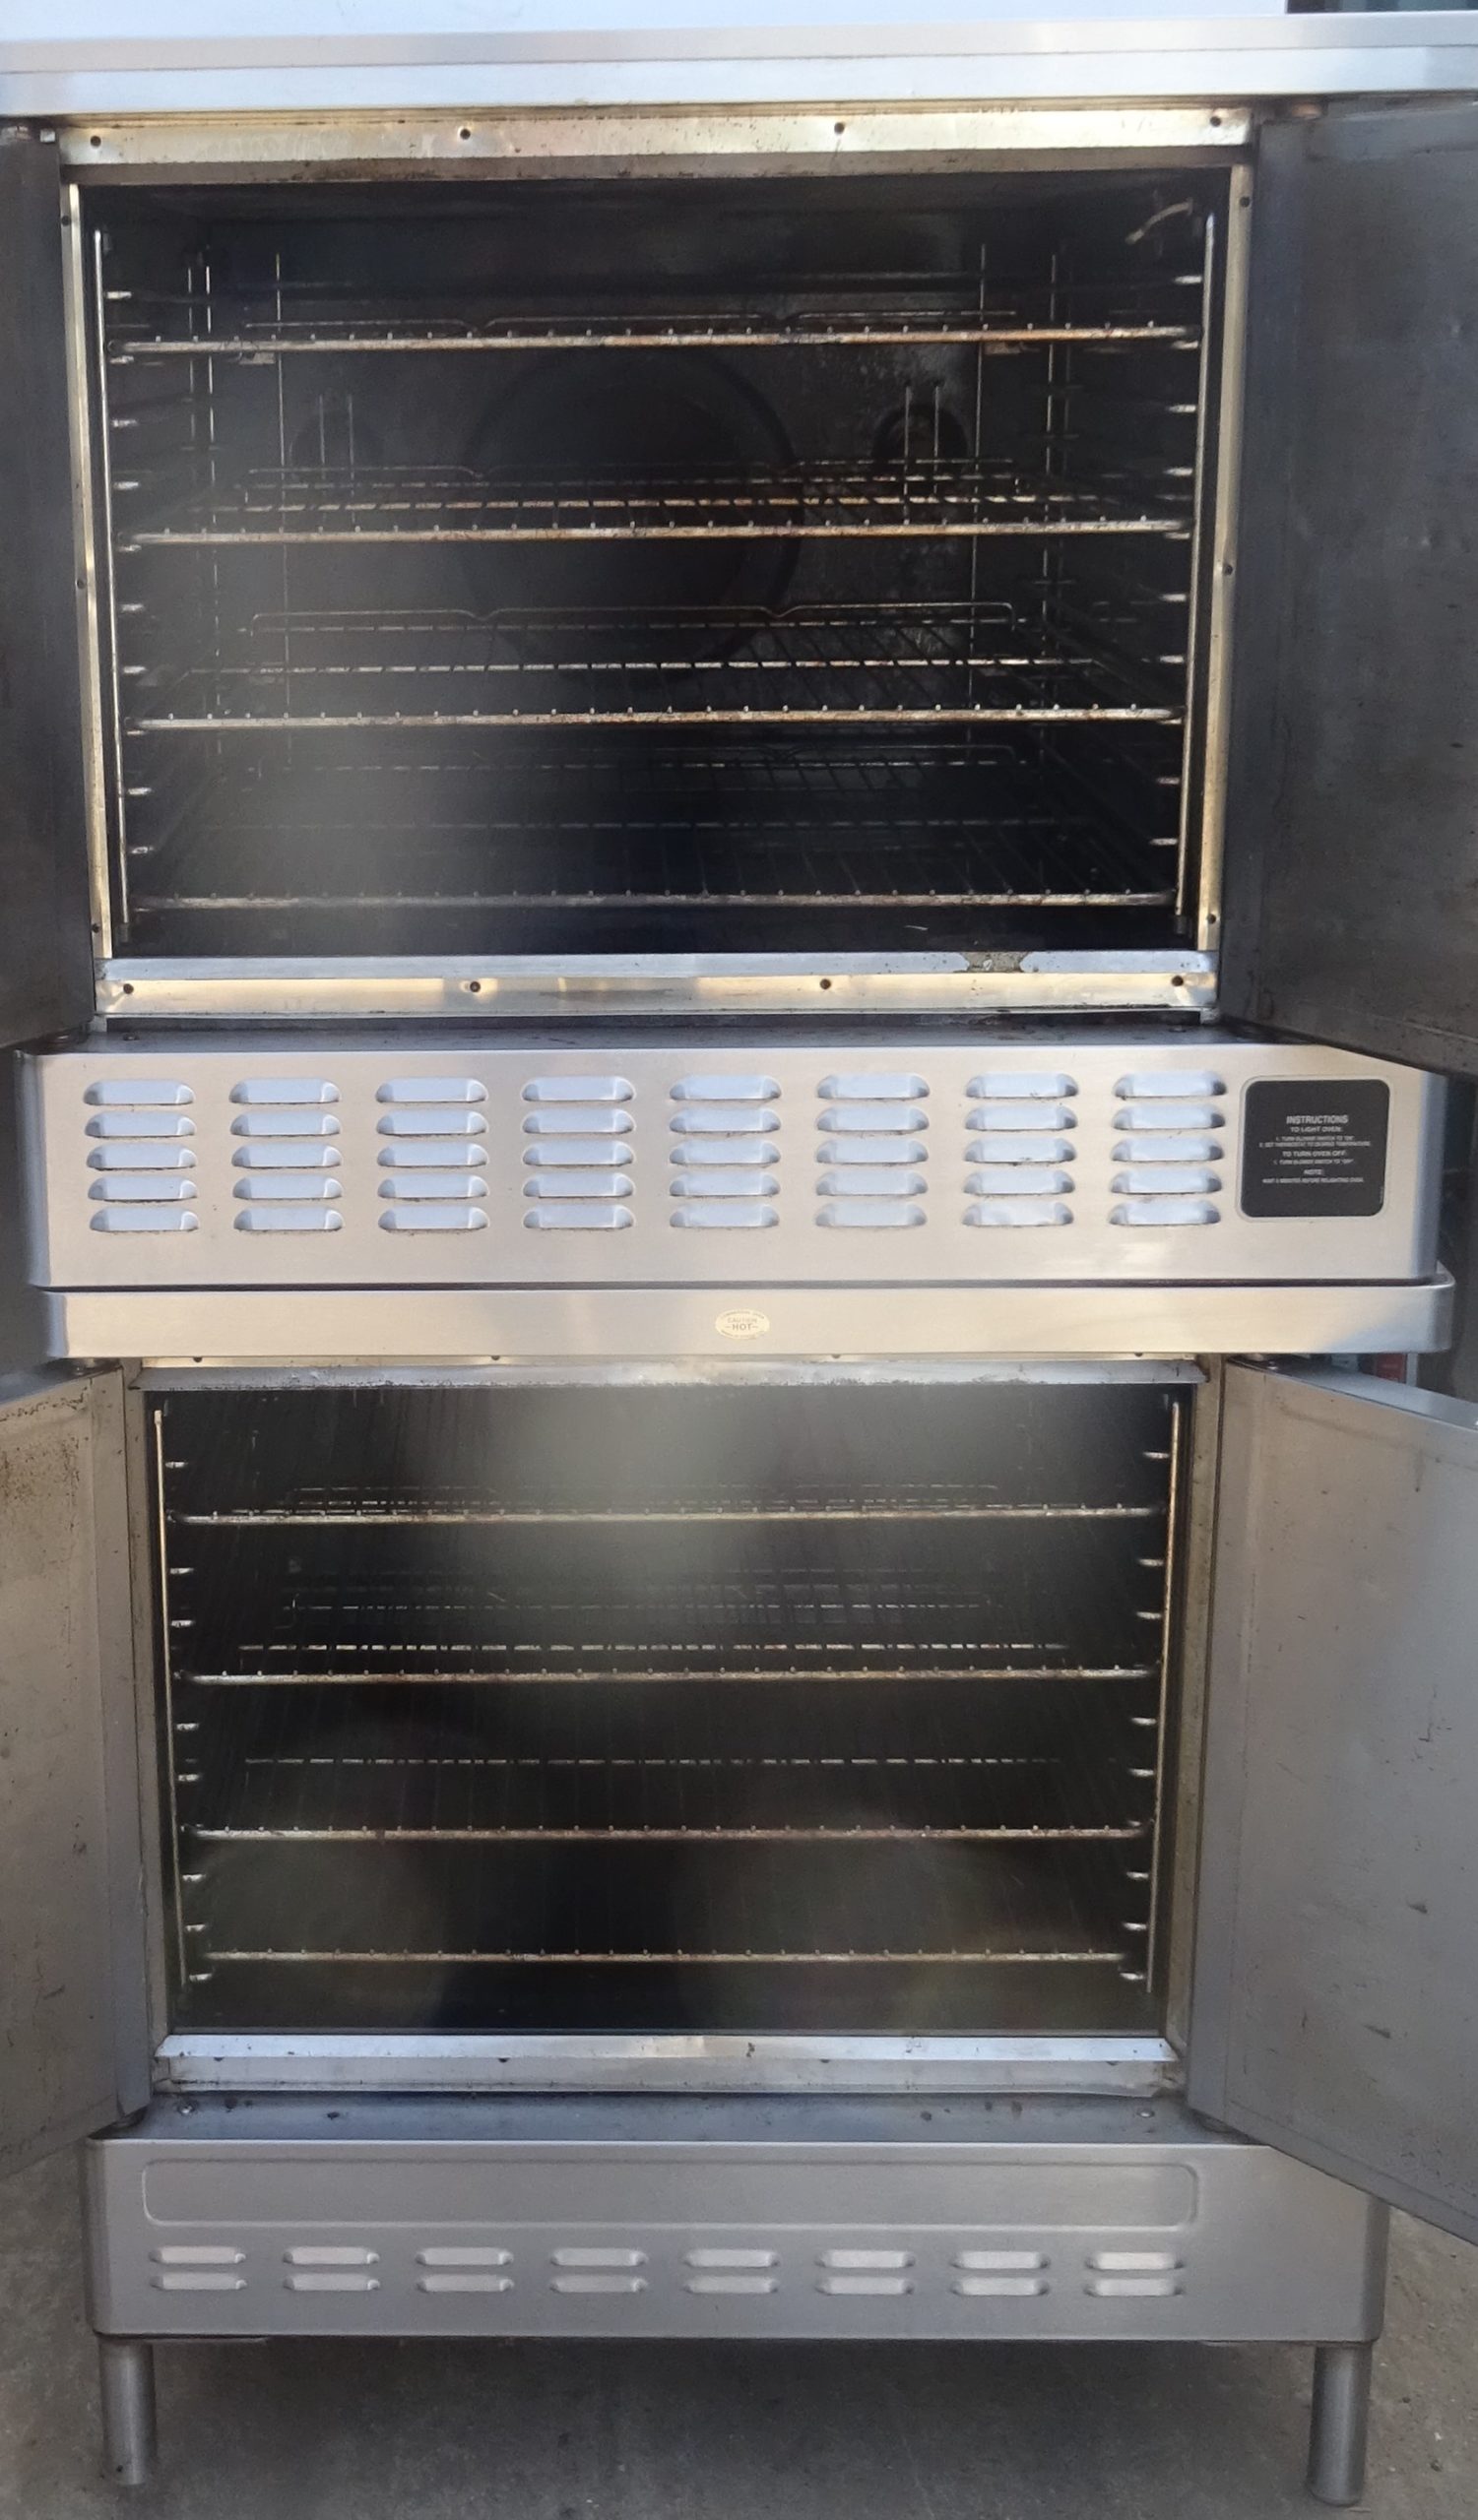 BLODGETT Xephaire Dual Flow Double Stacked Gas Convection Ovens